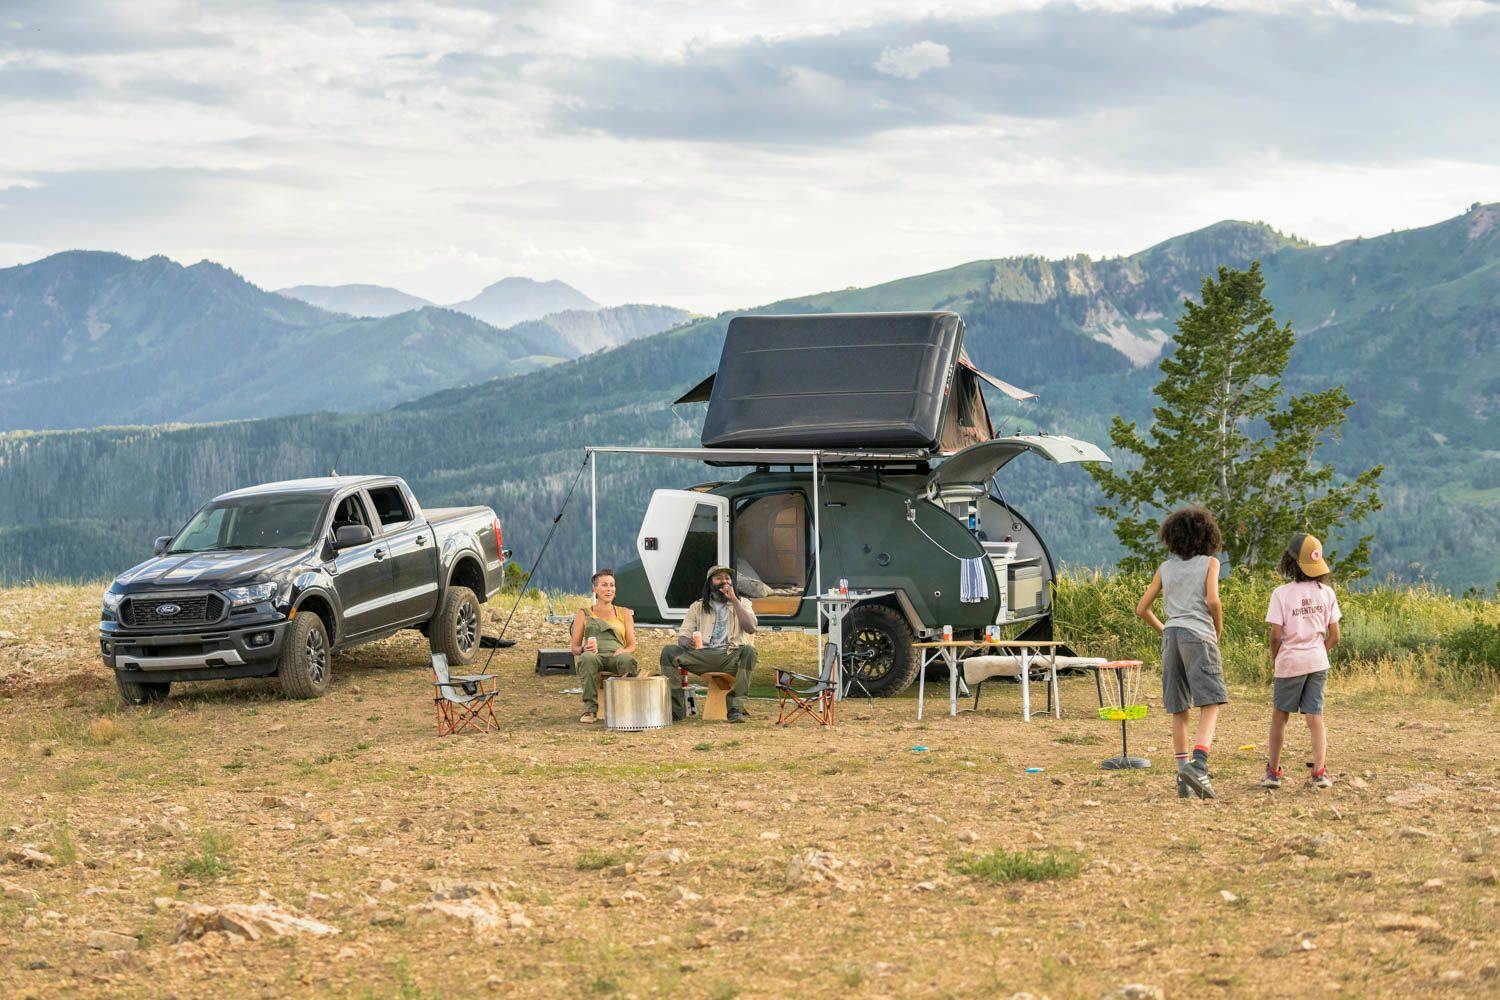 A family enjoying some campsite games in front of their teardrop camper.